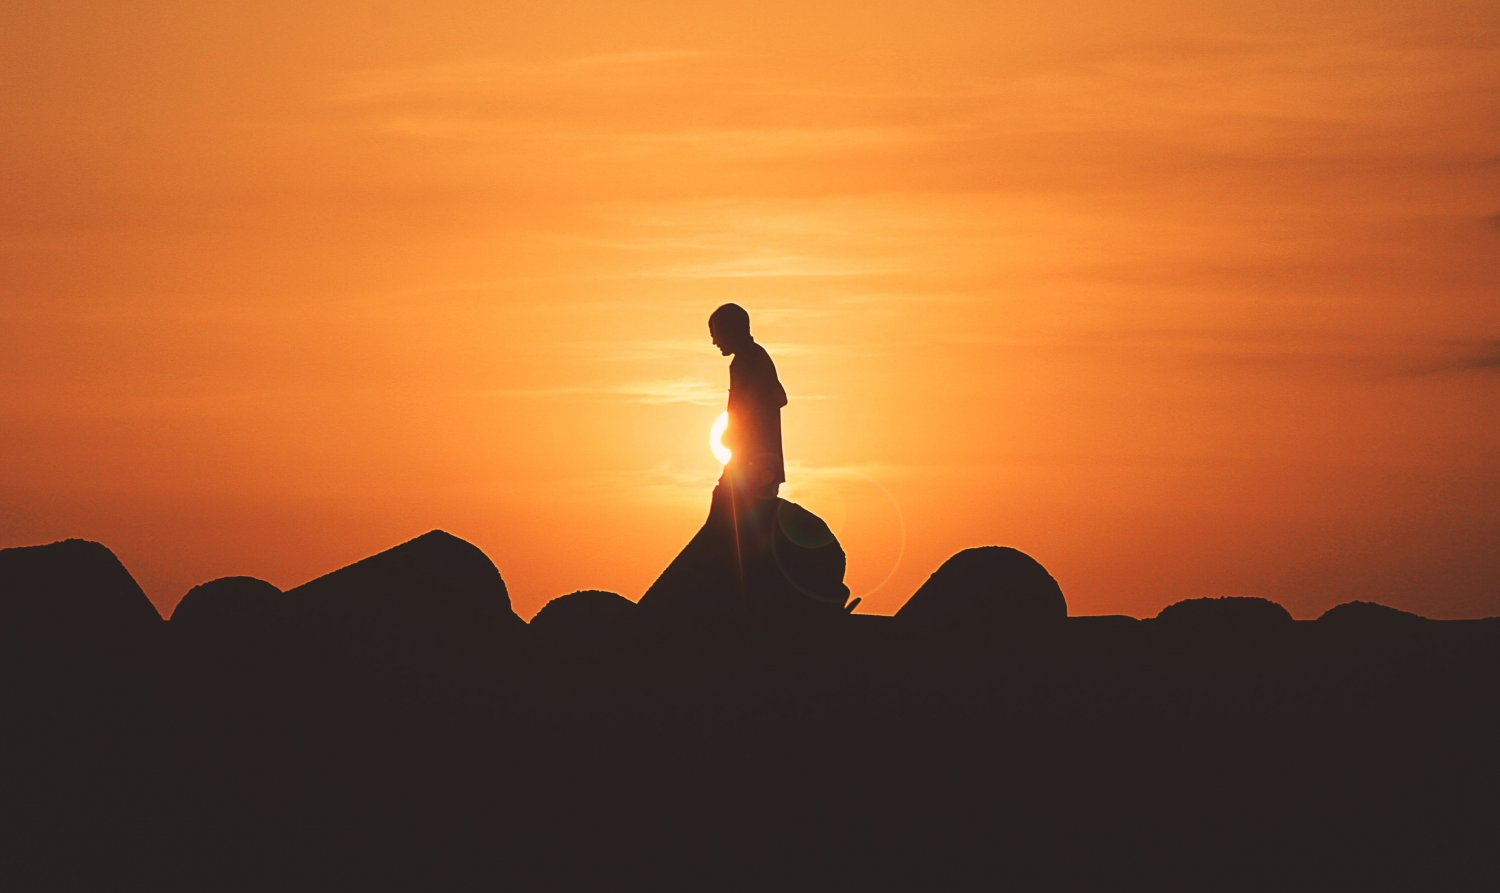 Silhouette of man standing in front of an orange sunset